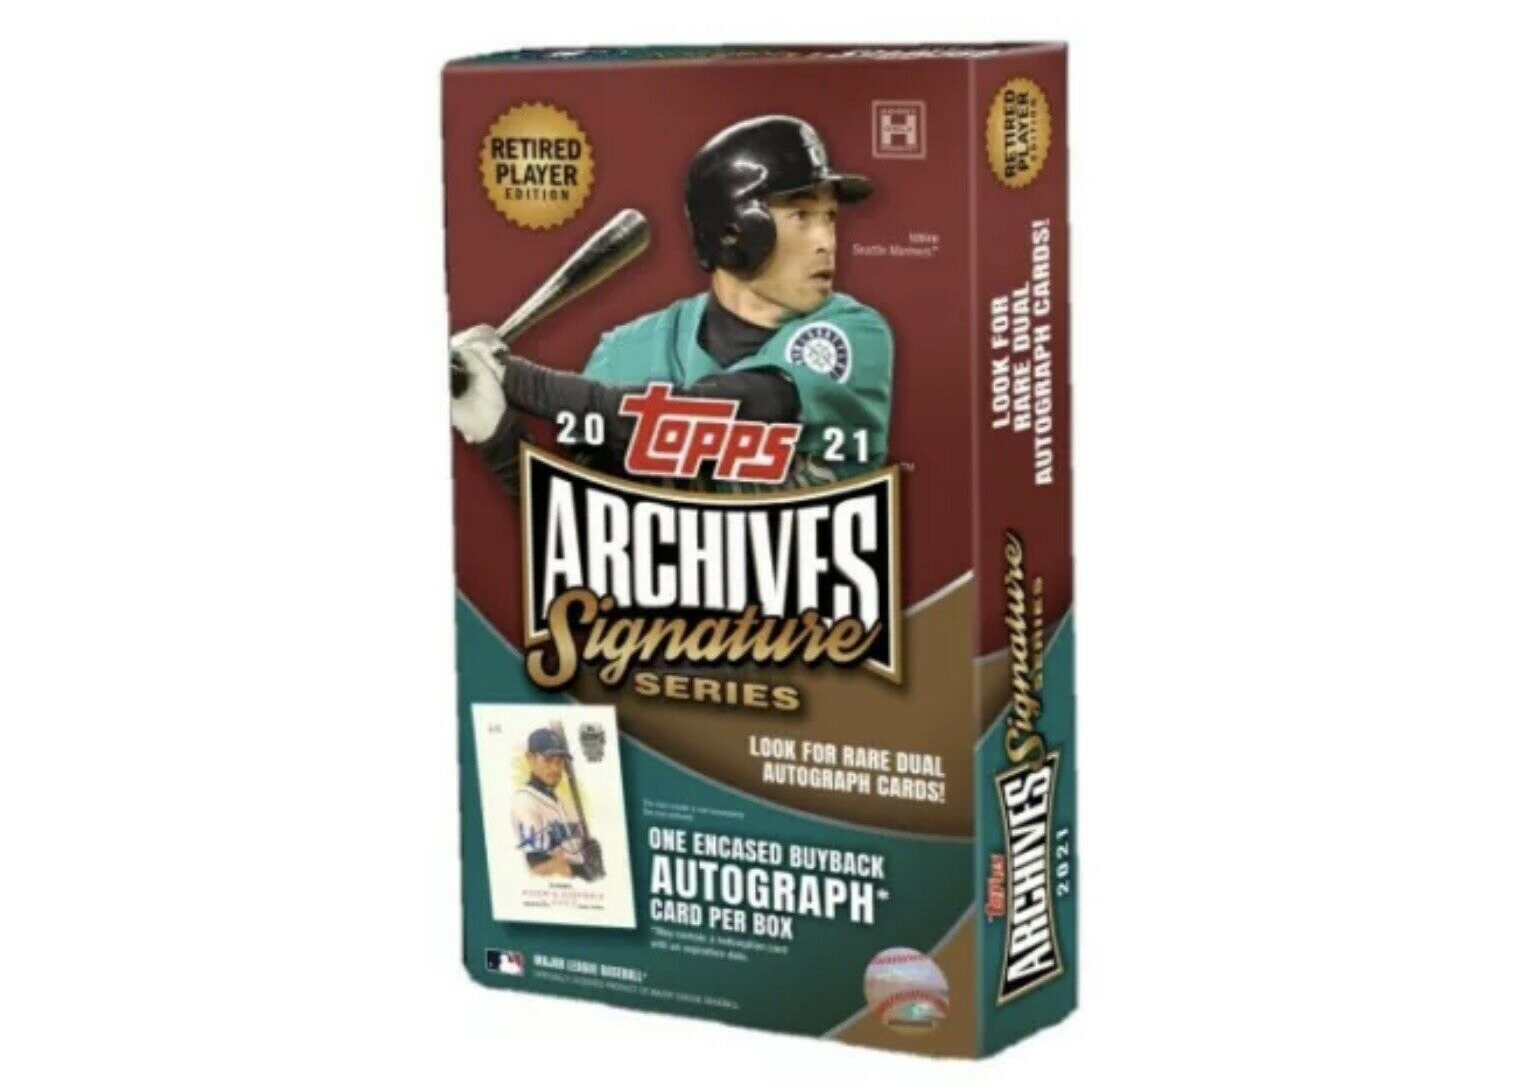 2021 Topps Archives Signature Series Retired Player Edition Baseball Hobby  Box